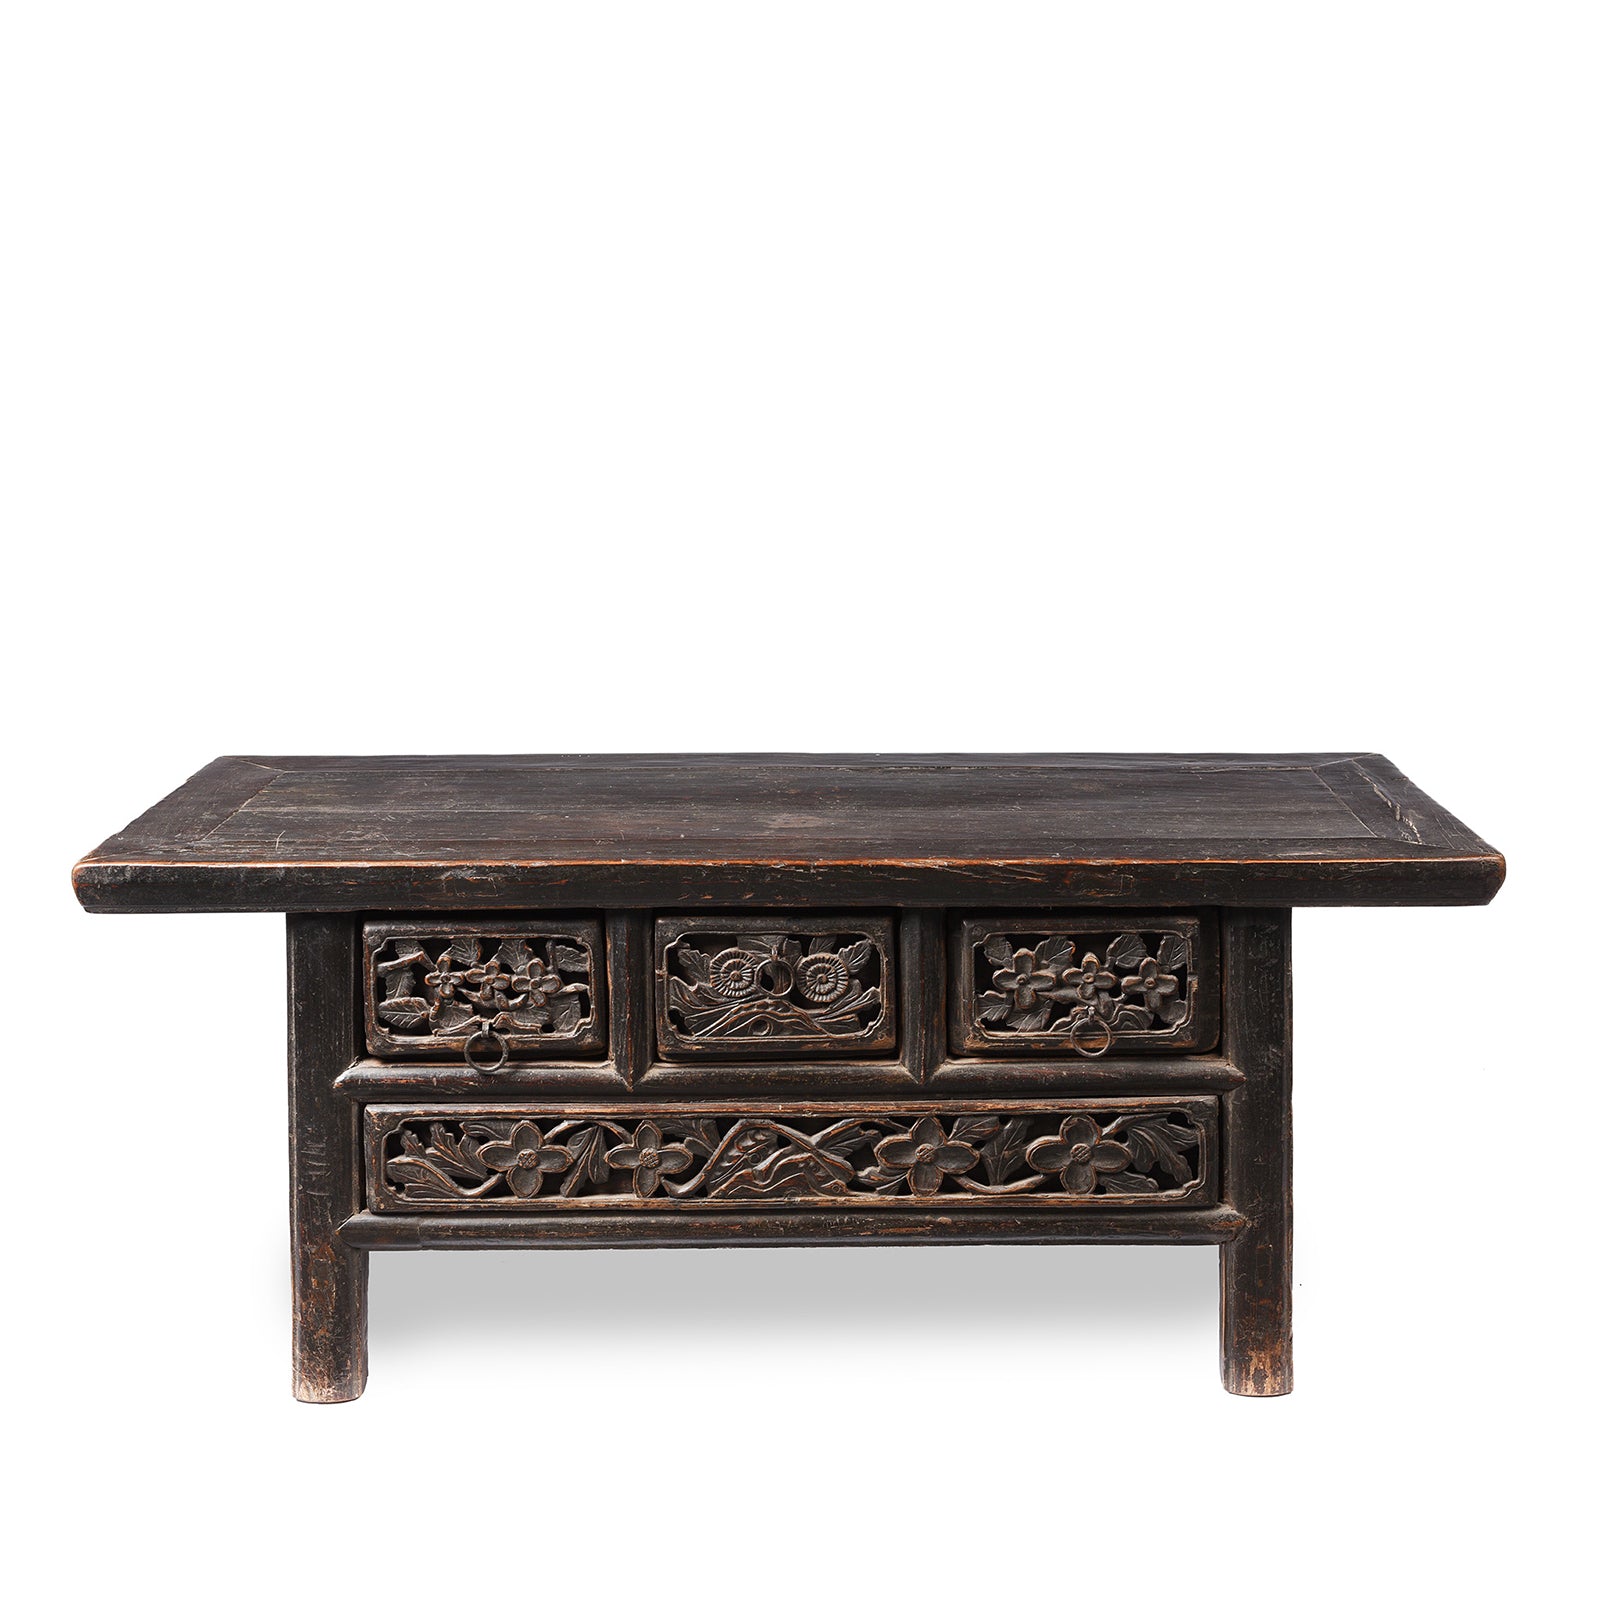 Painted Antique Elm Kang Table From Shanxi  - Late 19thC | Indigo Antiques